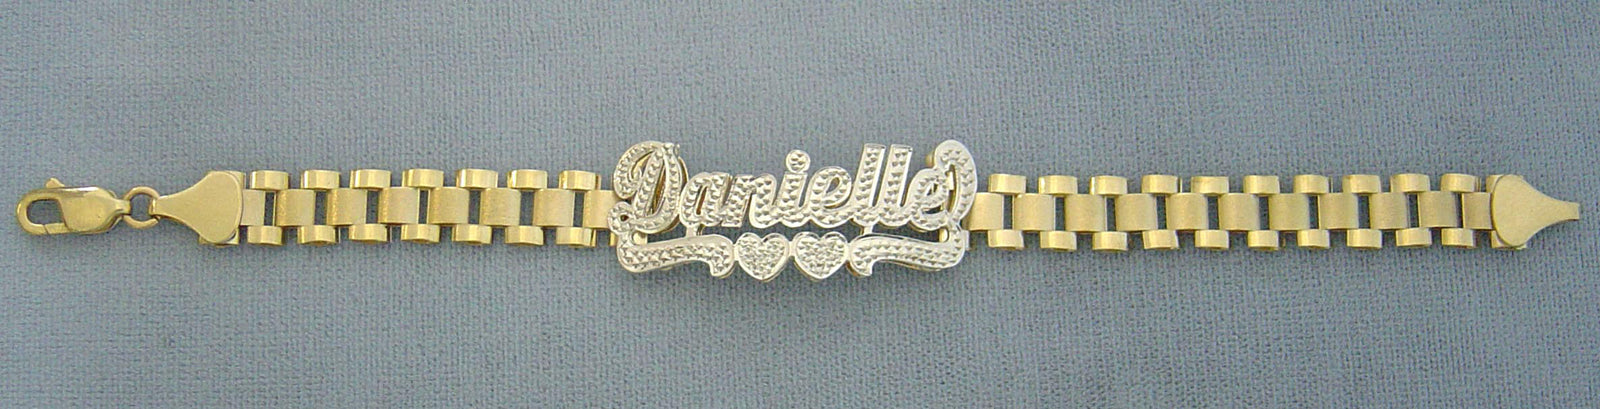 Amazon.com: Personalized Name Bracelet 18K Gold Plated Nameplate Bracelet  Cuff Customized Name Bracelet Birthday Personalized Gift for Women Girls:  Clothing, Shoes & Jewelry